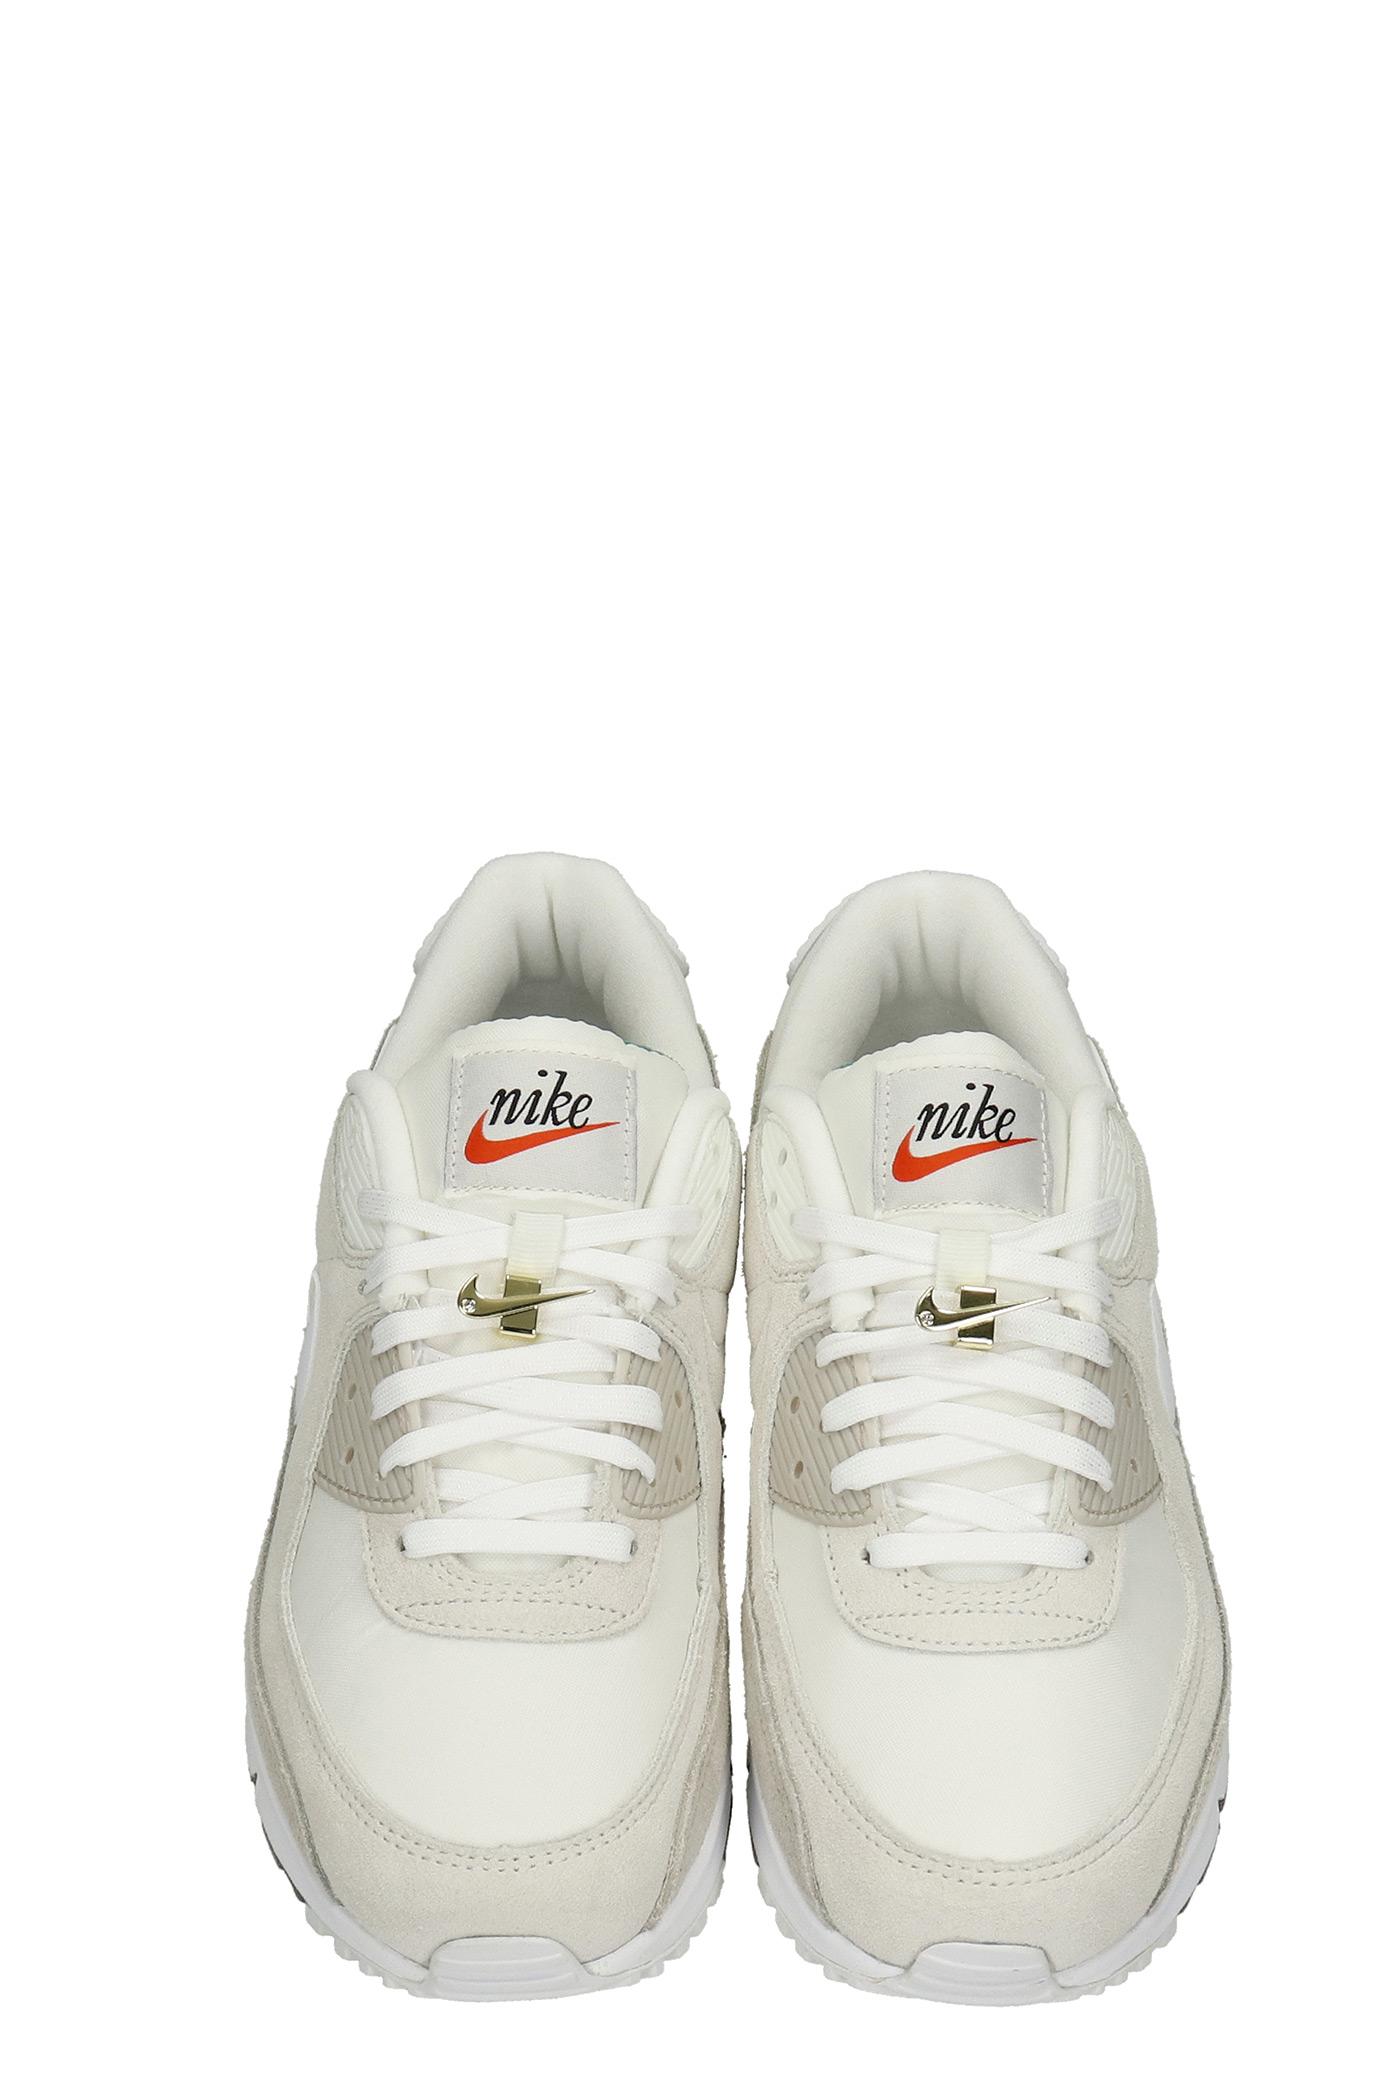 præmie Ungkarl gås Nike Air Max 90 Se Sneakers In White Suede And Leather for Men | Lyst